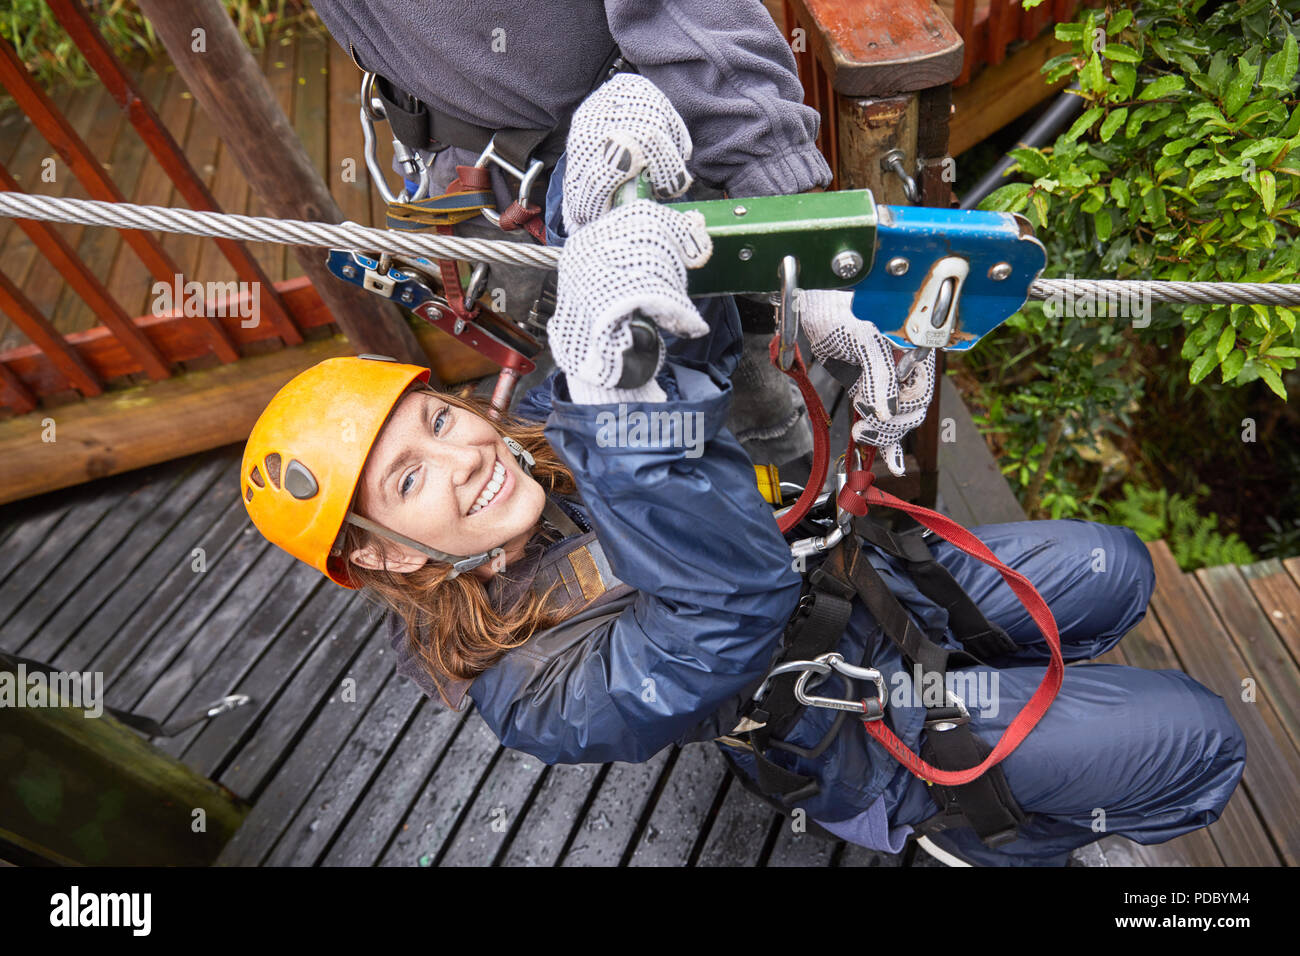 Portrait smiling young woman zip lining Stock Photo